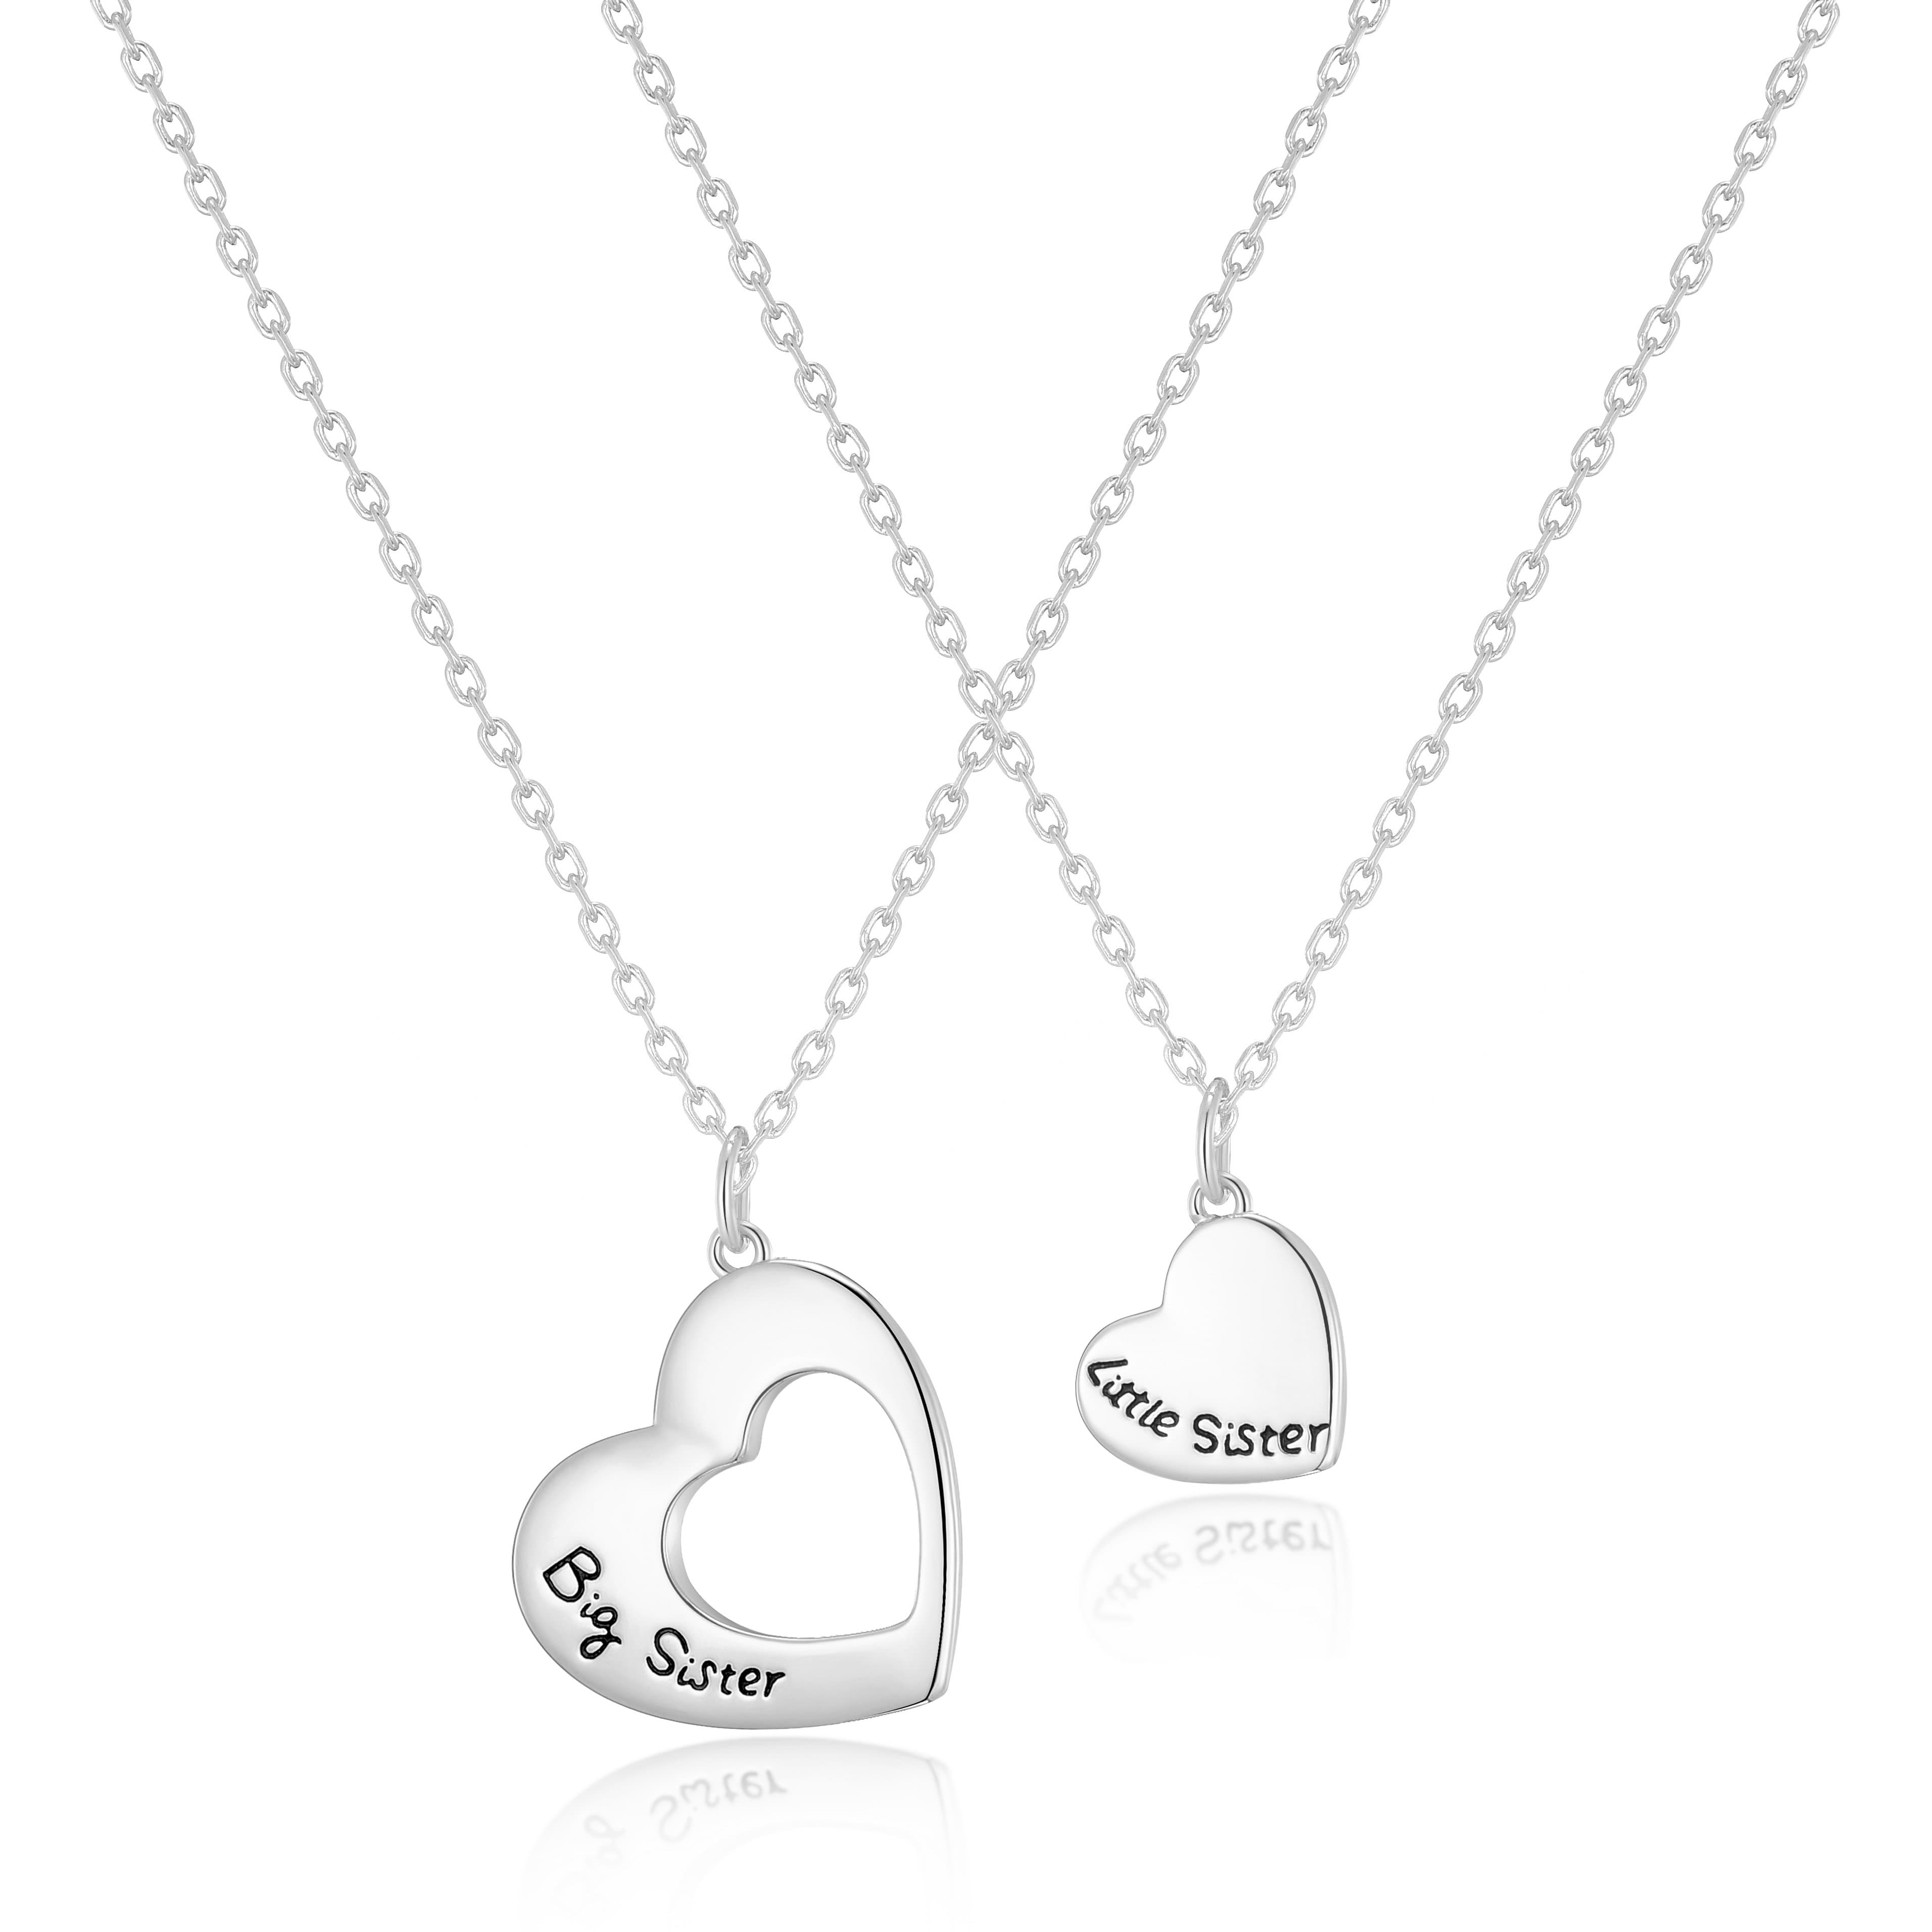 Silver Plated Big Sister and Little Sister Necklace Set by Philip Jones Jewellery